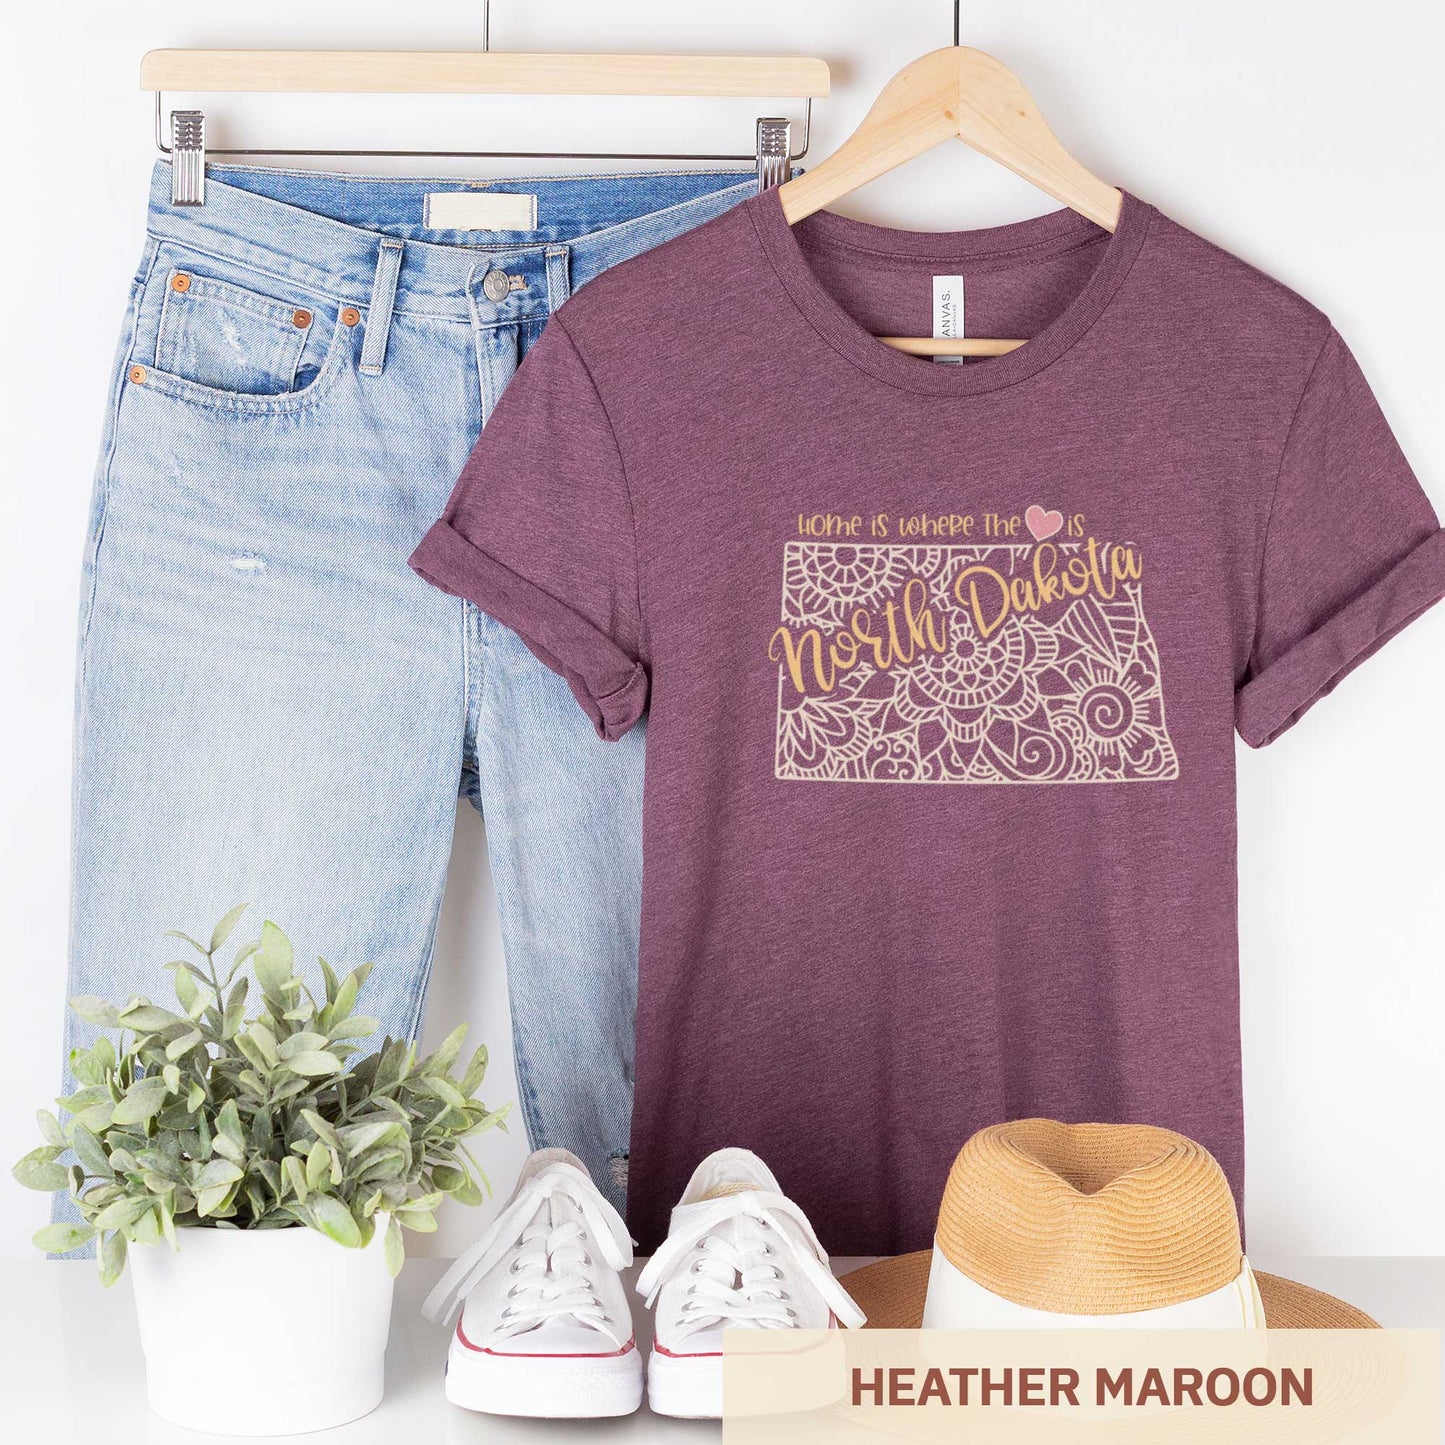 A hanging heather maroon Bella Canvas t-shirt featuring a mandala in the shape of North Dakota with the words home is where the heart is.